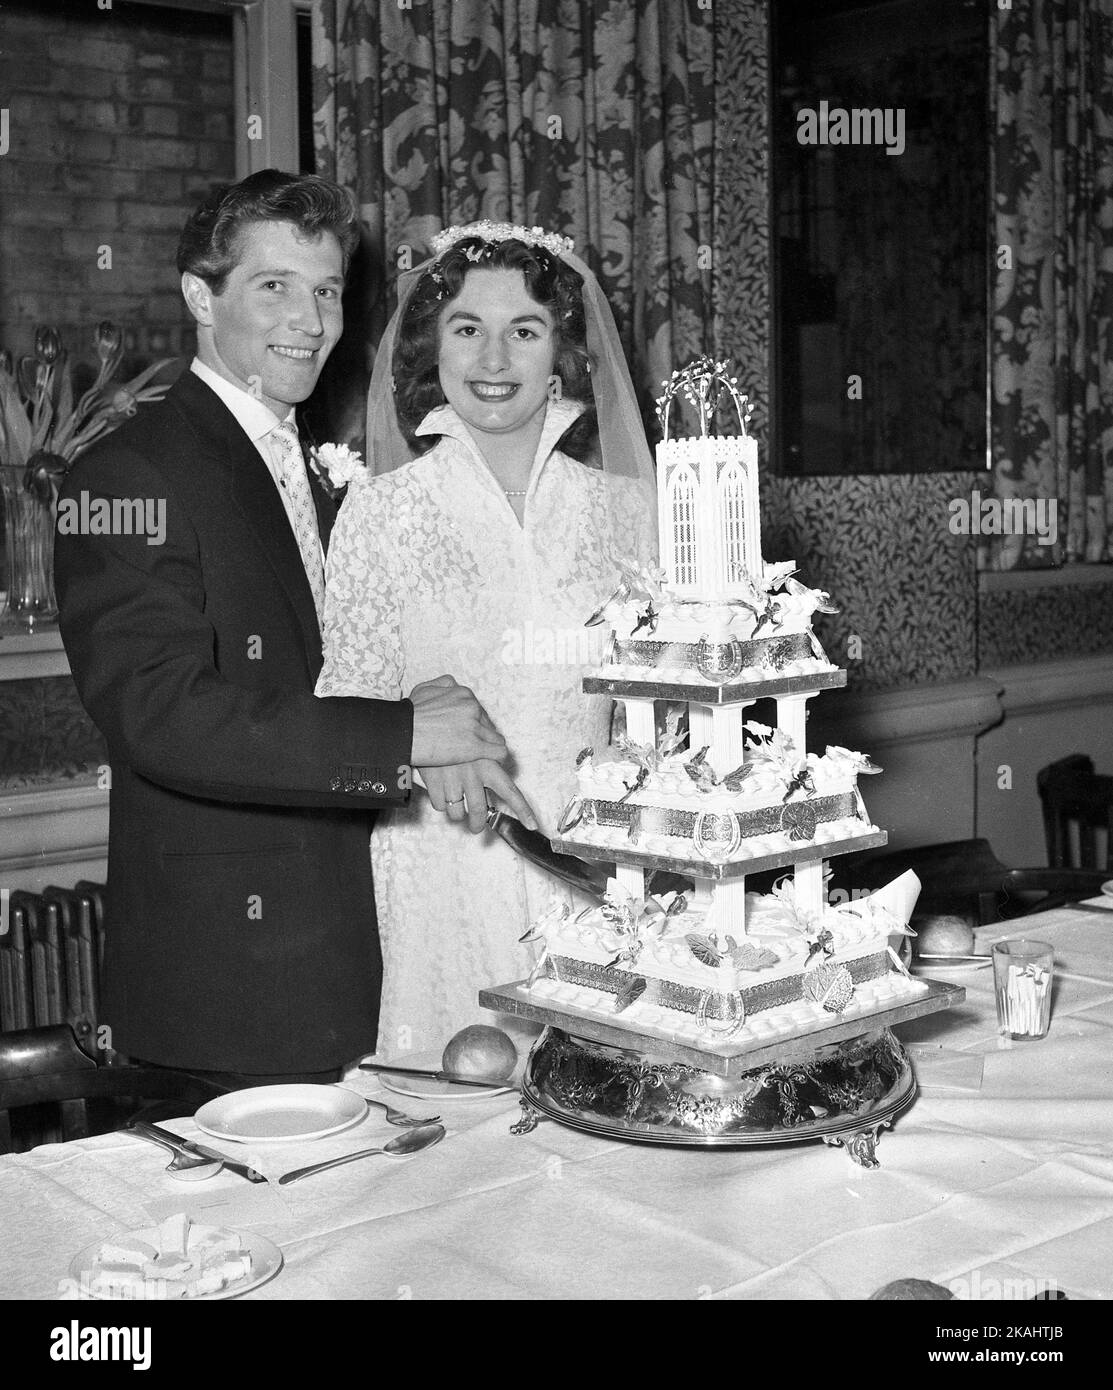 Wedding Day of Mr & Mrs Francis of 23 Myrtle Road, London E17 c1952 The happy couple and the cutting of the cake at the reception  Photo by Tony Henshaw Archive Stock Photo